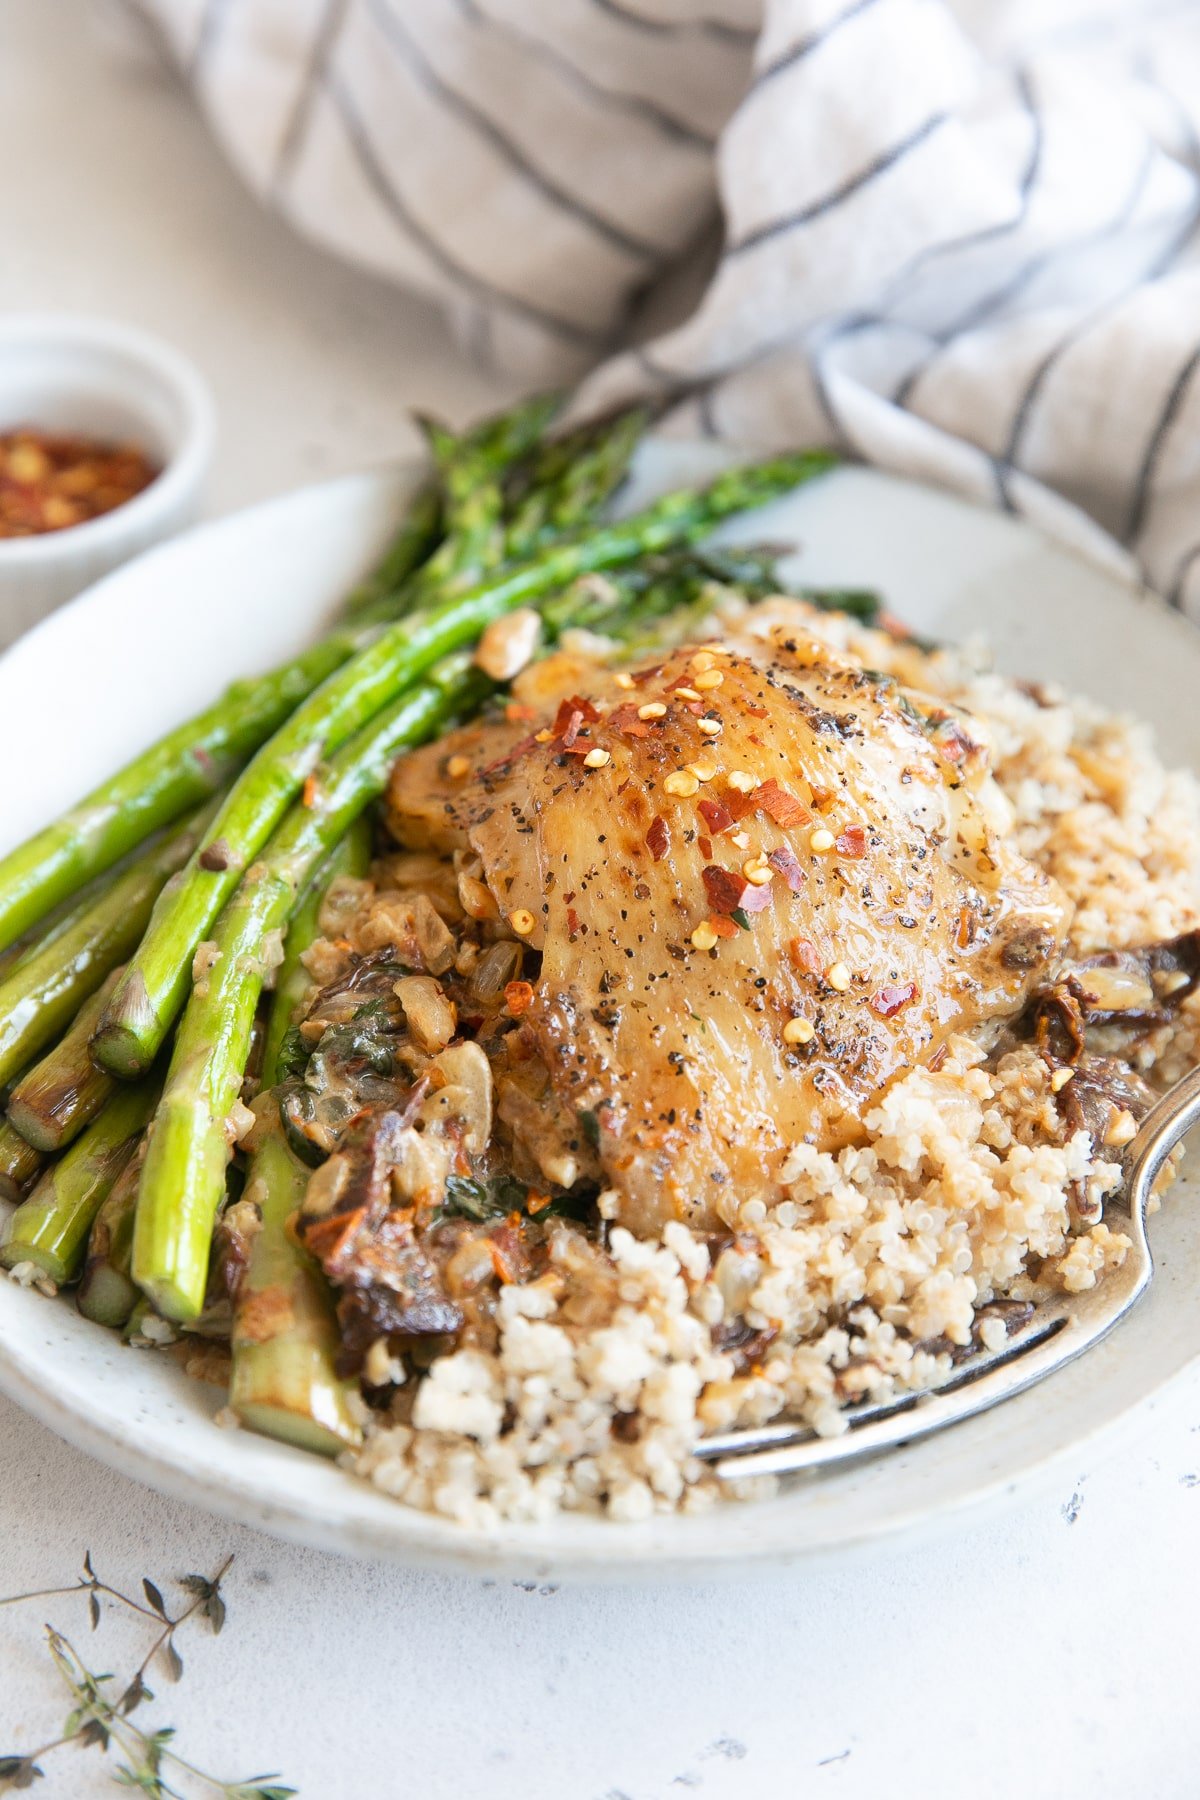 Plate filled with asparagus and quinoa topped with creamy Tuscan chicken.